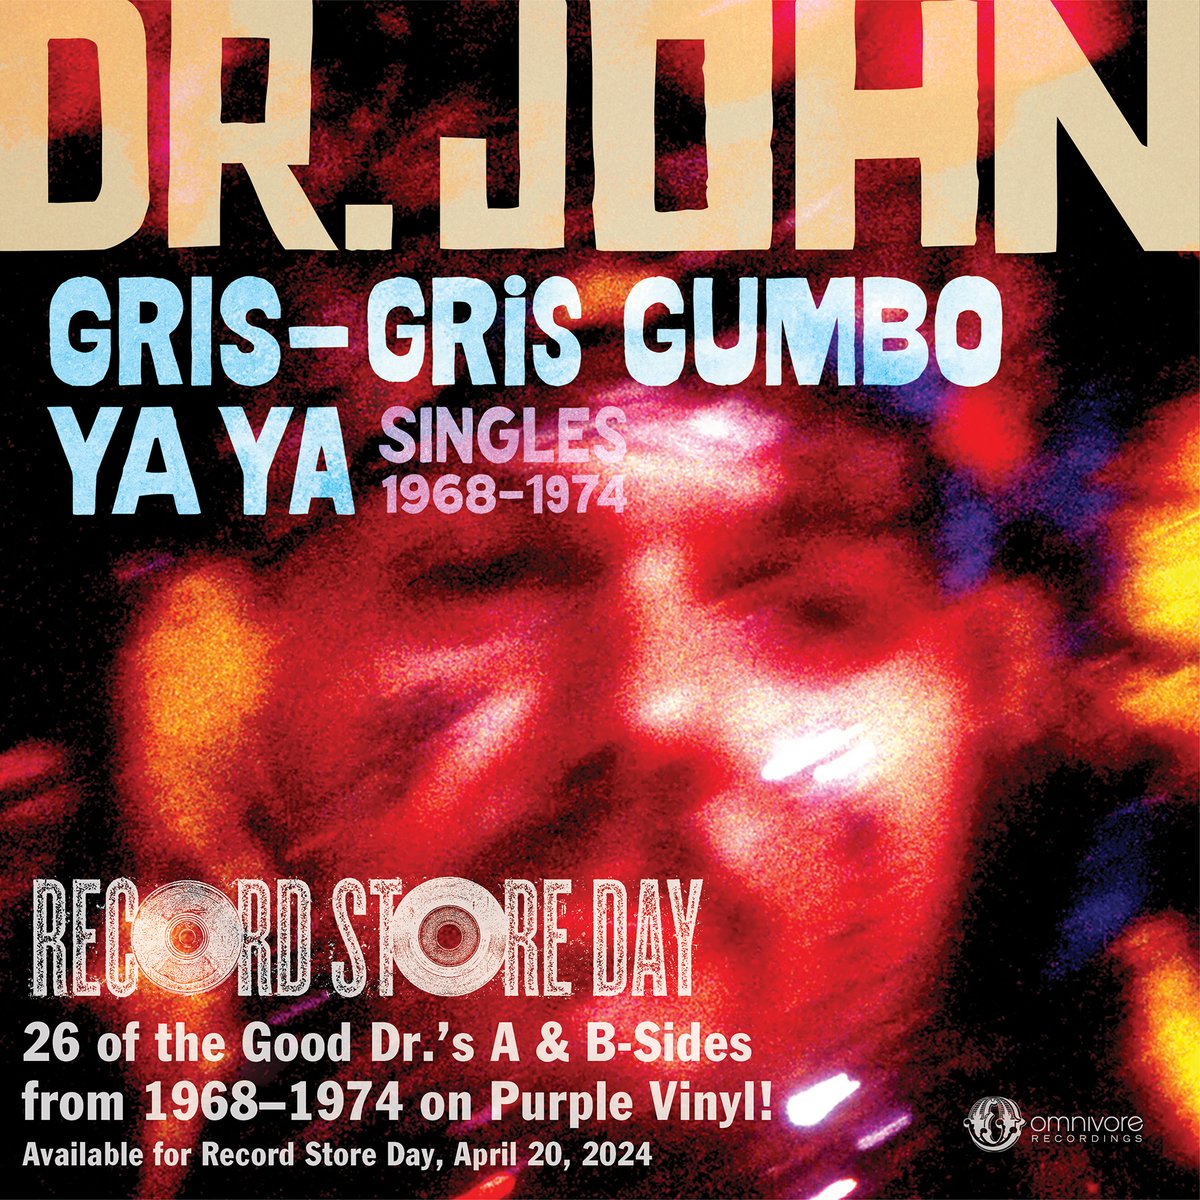 It's #RecordStoreDay today, 4/20 - find your participating indie record store at recordstoreday.com & celebrate with the purple double vinyl release of 'Dr. John - Gris-Gris Gumbo Ya Ya: Singles 1968-1974' on @omnivorerecords 🎩 @recordstoreday #rsd2024